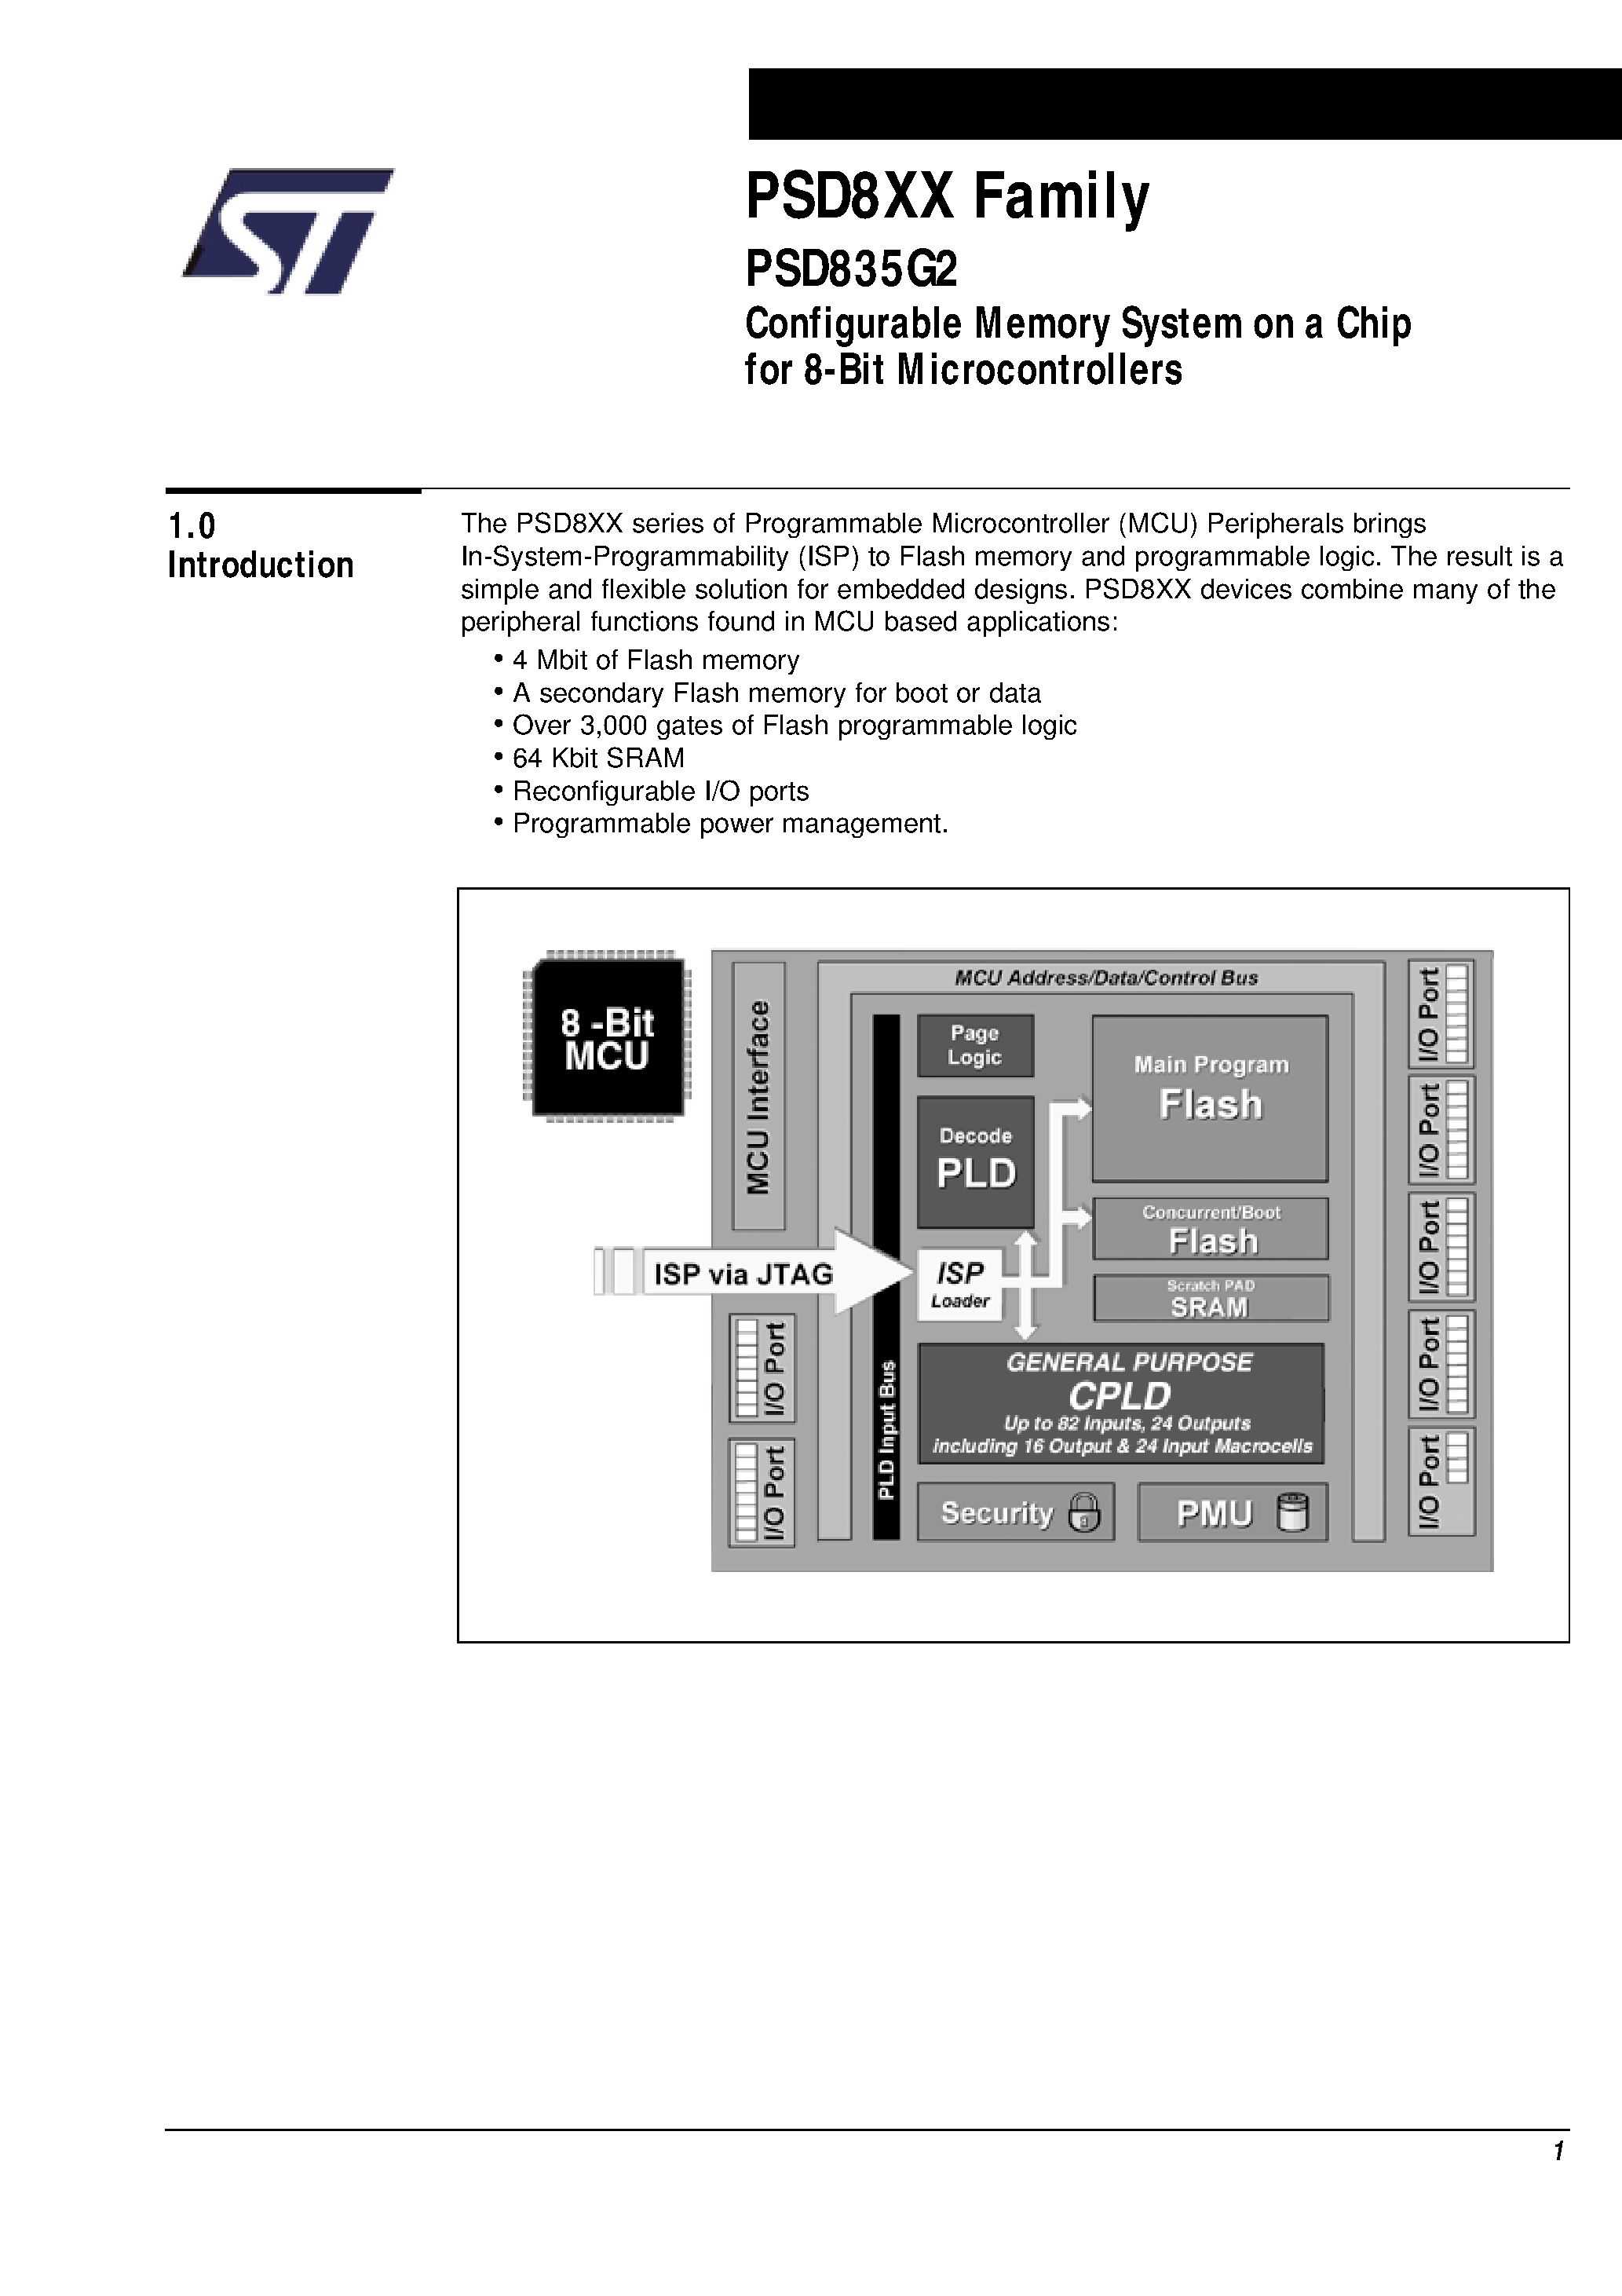 Datasheet PSD835F2V-A-90B81 - Configurable Memory System on a Chip for 8-Bit Microcontrollers page 2